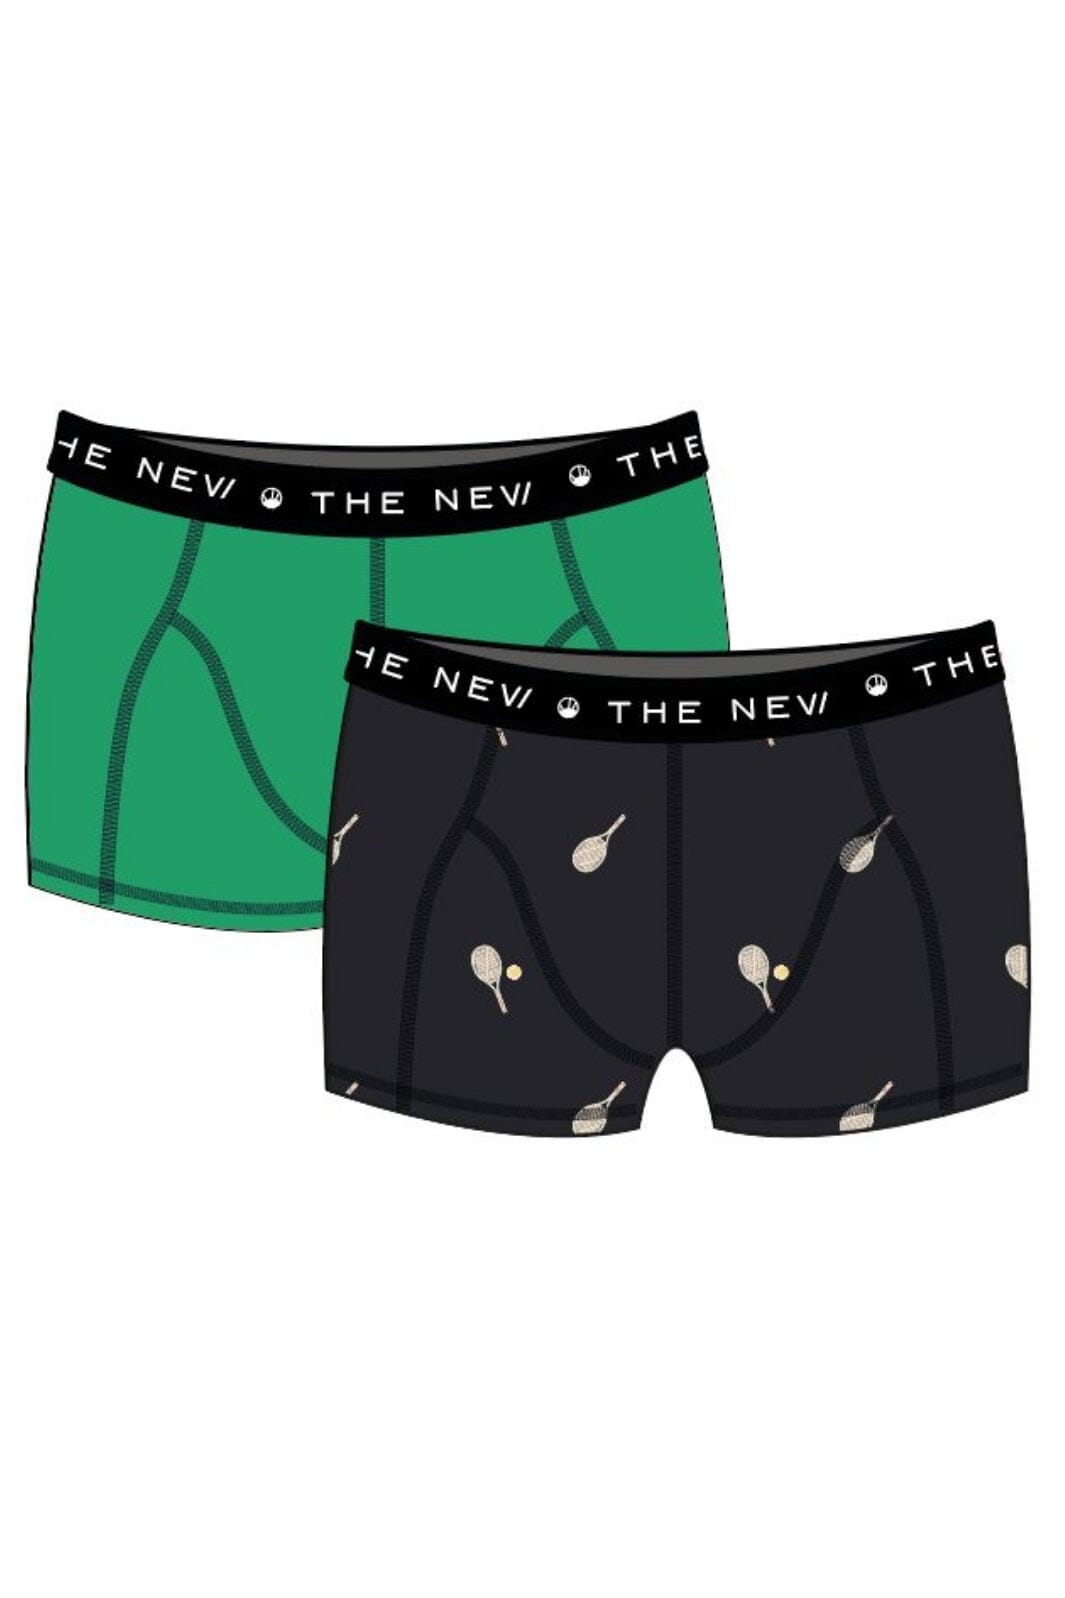 The New - The New Boxers 2-pack - Holly Green Underbukser 